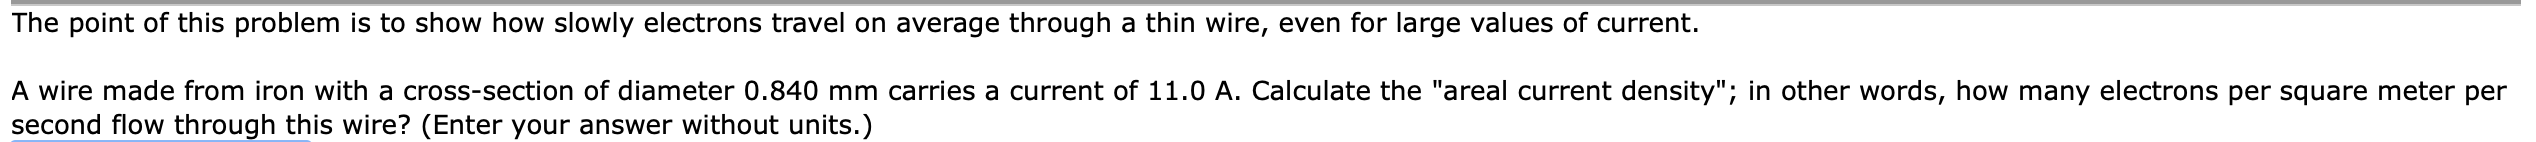 The point of this problem is to show how slowly electrons travel on average through a thin wire, even for large values of current.
A wire made from iron with a cross-section of diameter 0.840 mm carries a current of 11.0 A. Calculate the "areal current density"; in other words, how many electrons per square meter per
second flow through this wire? (Enter your answer without units.)
